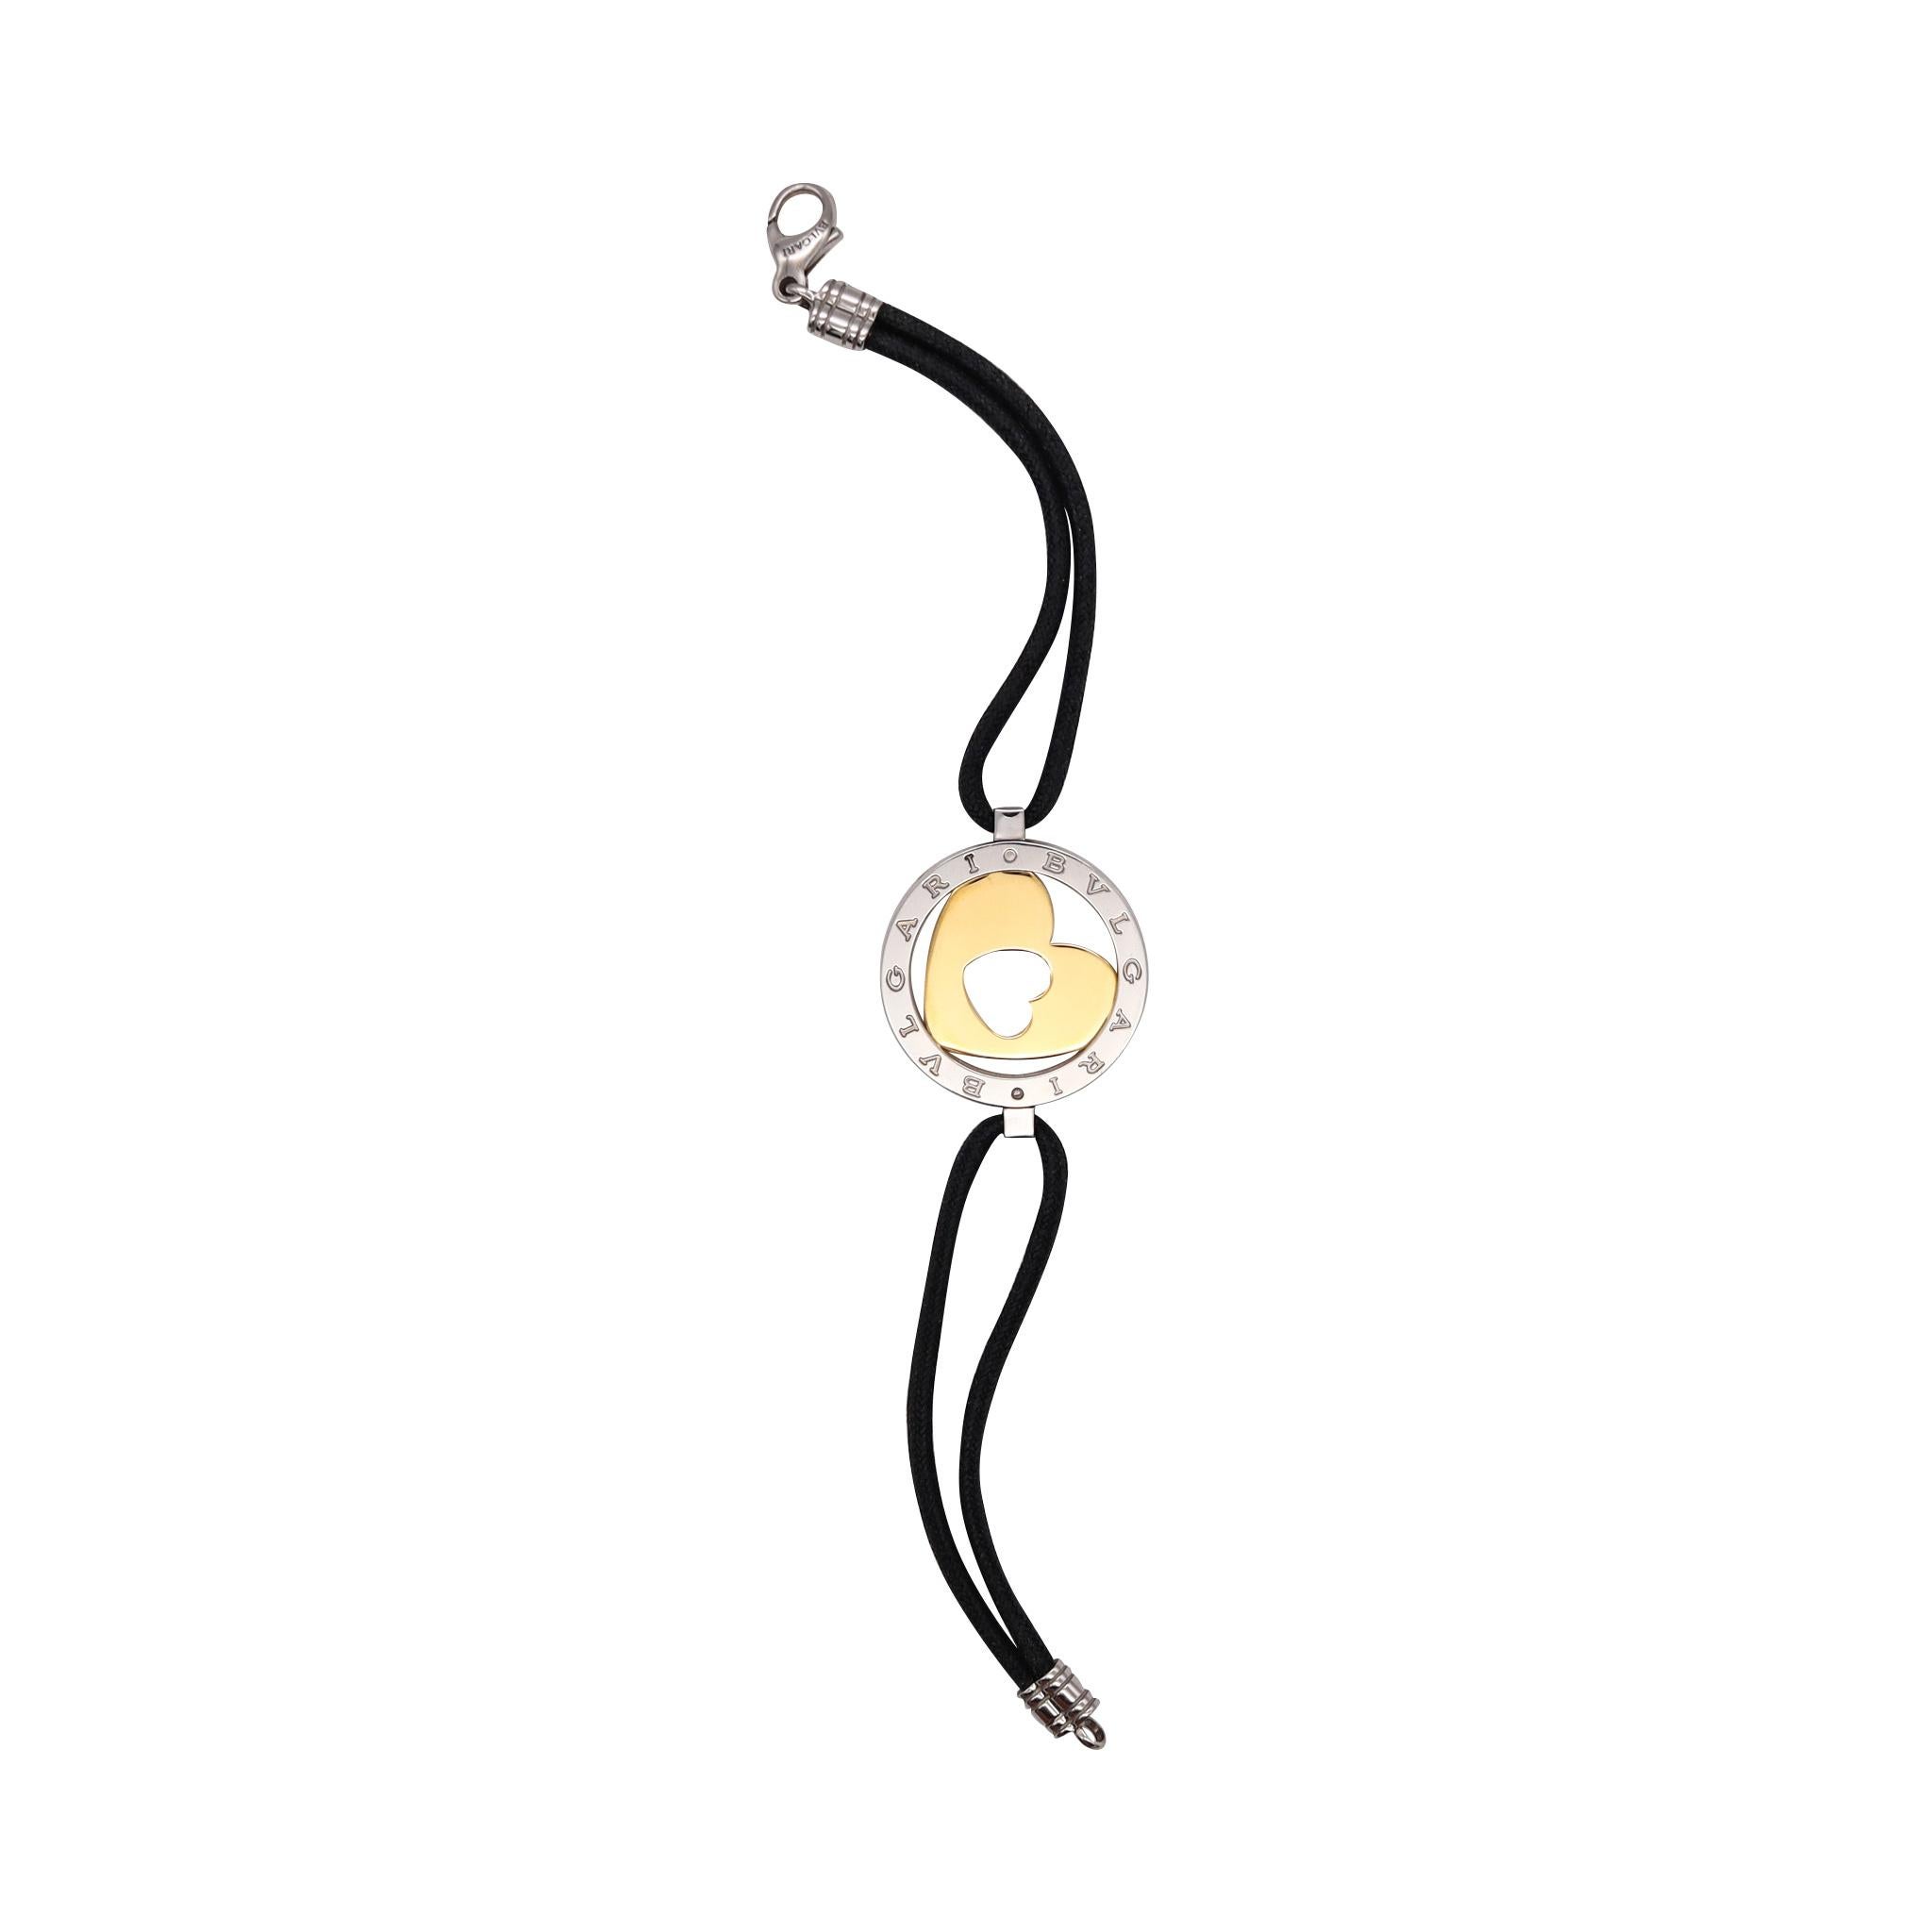 Tondo bracelet designed by Bvlgari.

Nice bracelet, crafted in Roma Italy by the house of Bvlgari in 18 karats yellow gold and stainless steel. Suited with a double straps silk cords and a security lobster lock.

Has a total weight of 9.92 Grams and